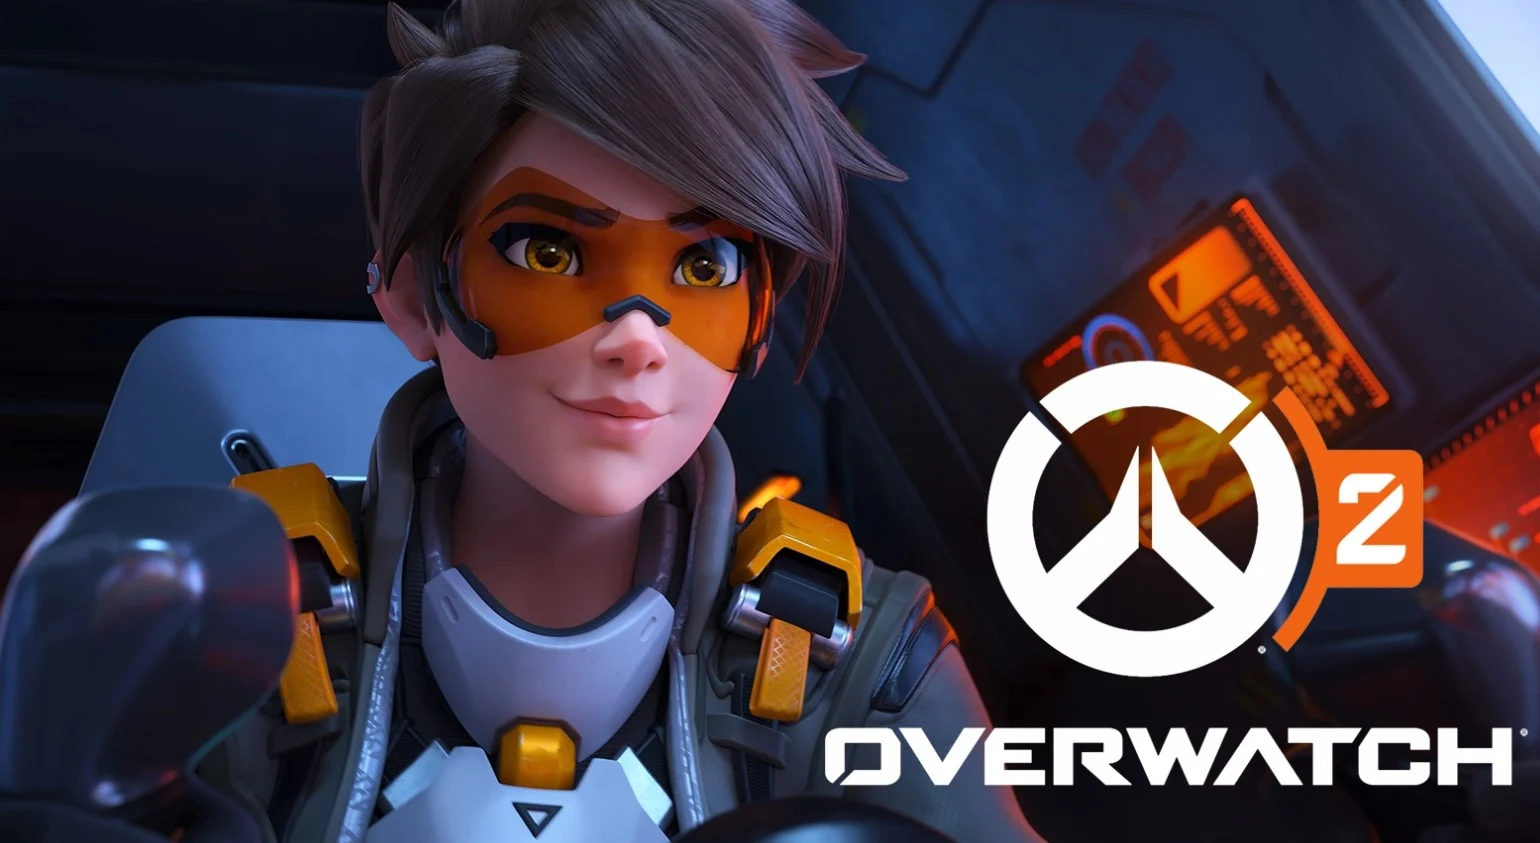 Will Overwatch 2 replace the original game?